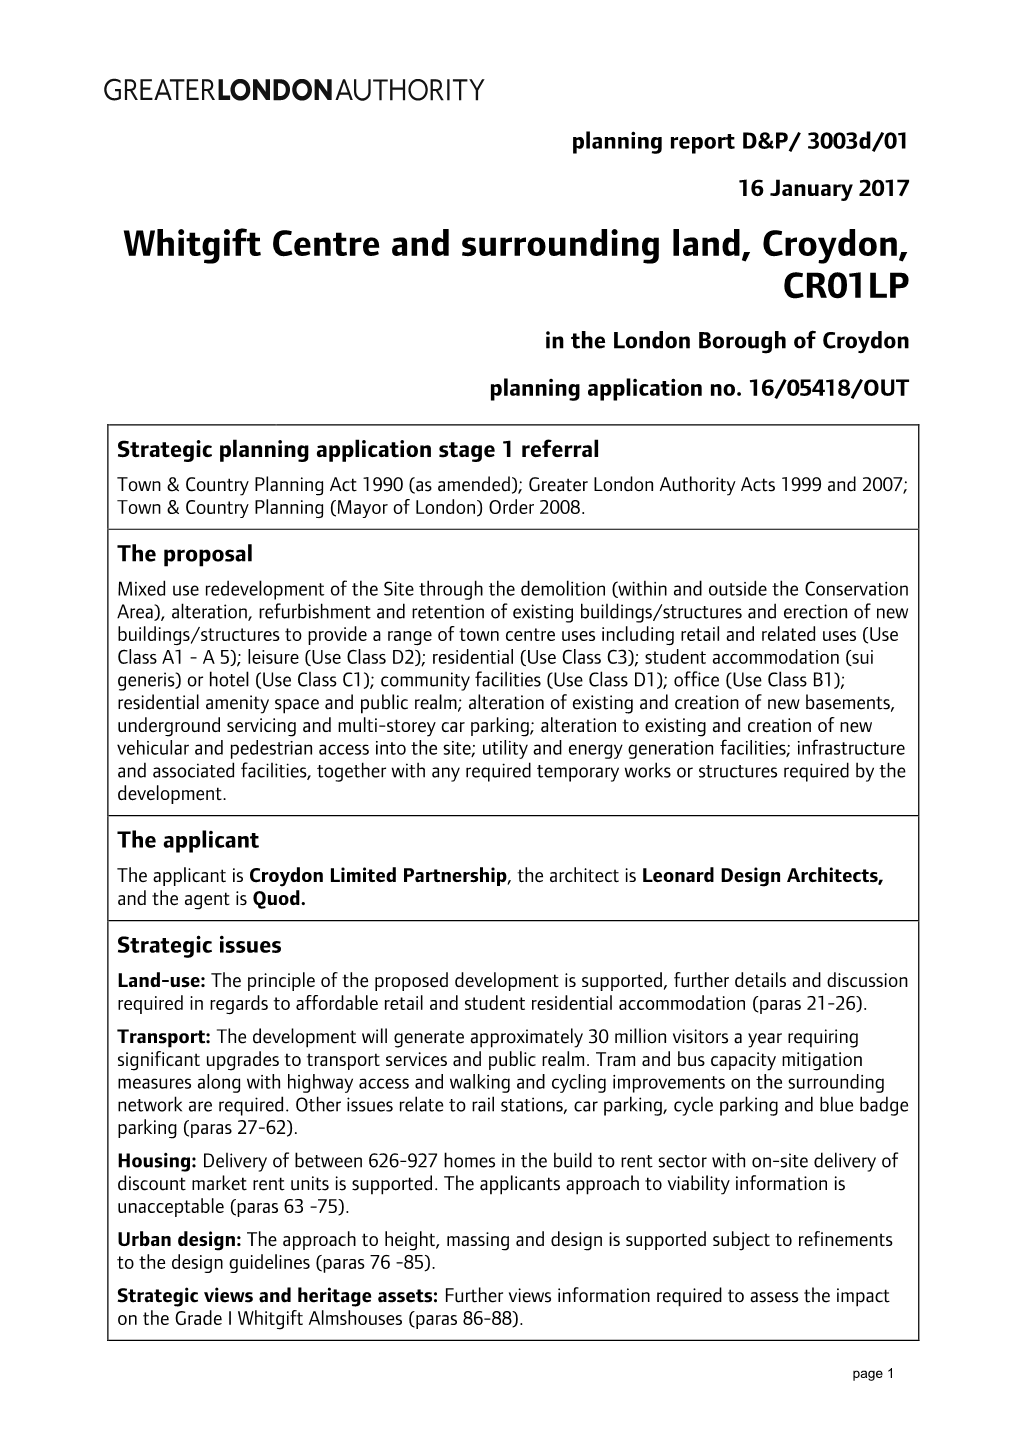 Whitgift Centre and Surrounding Land, Croydon, CR01LP in the London Borough of Croydon Planning Application No